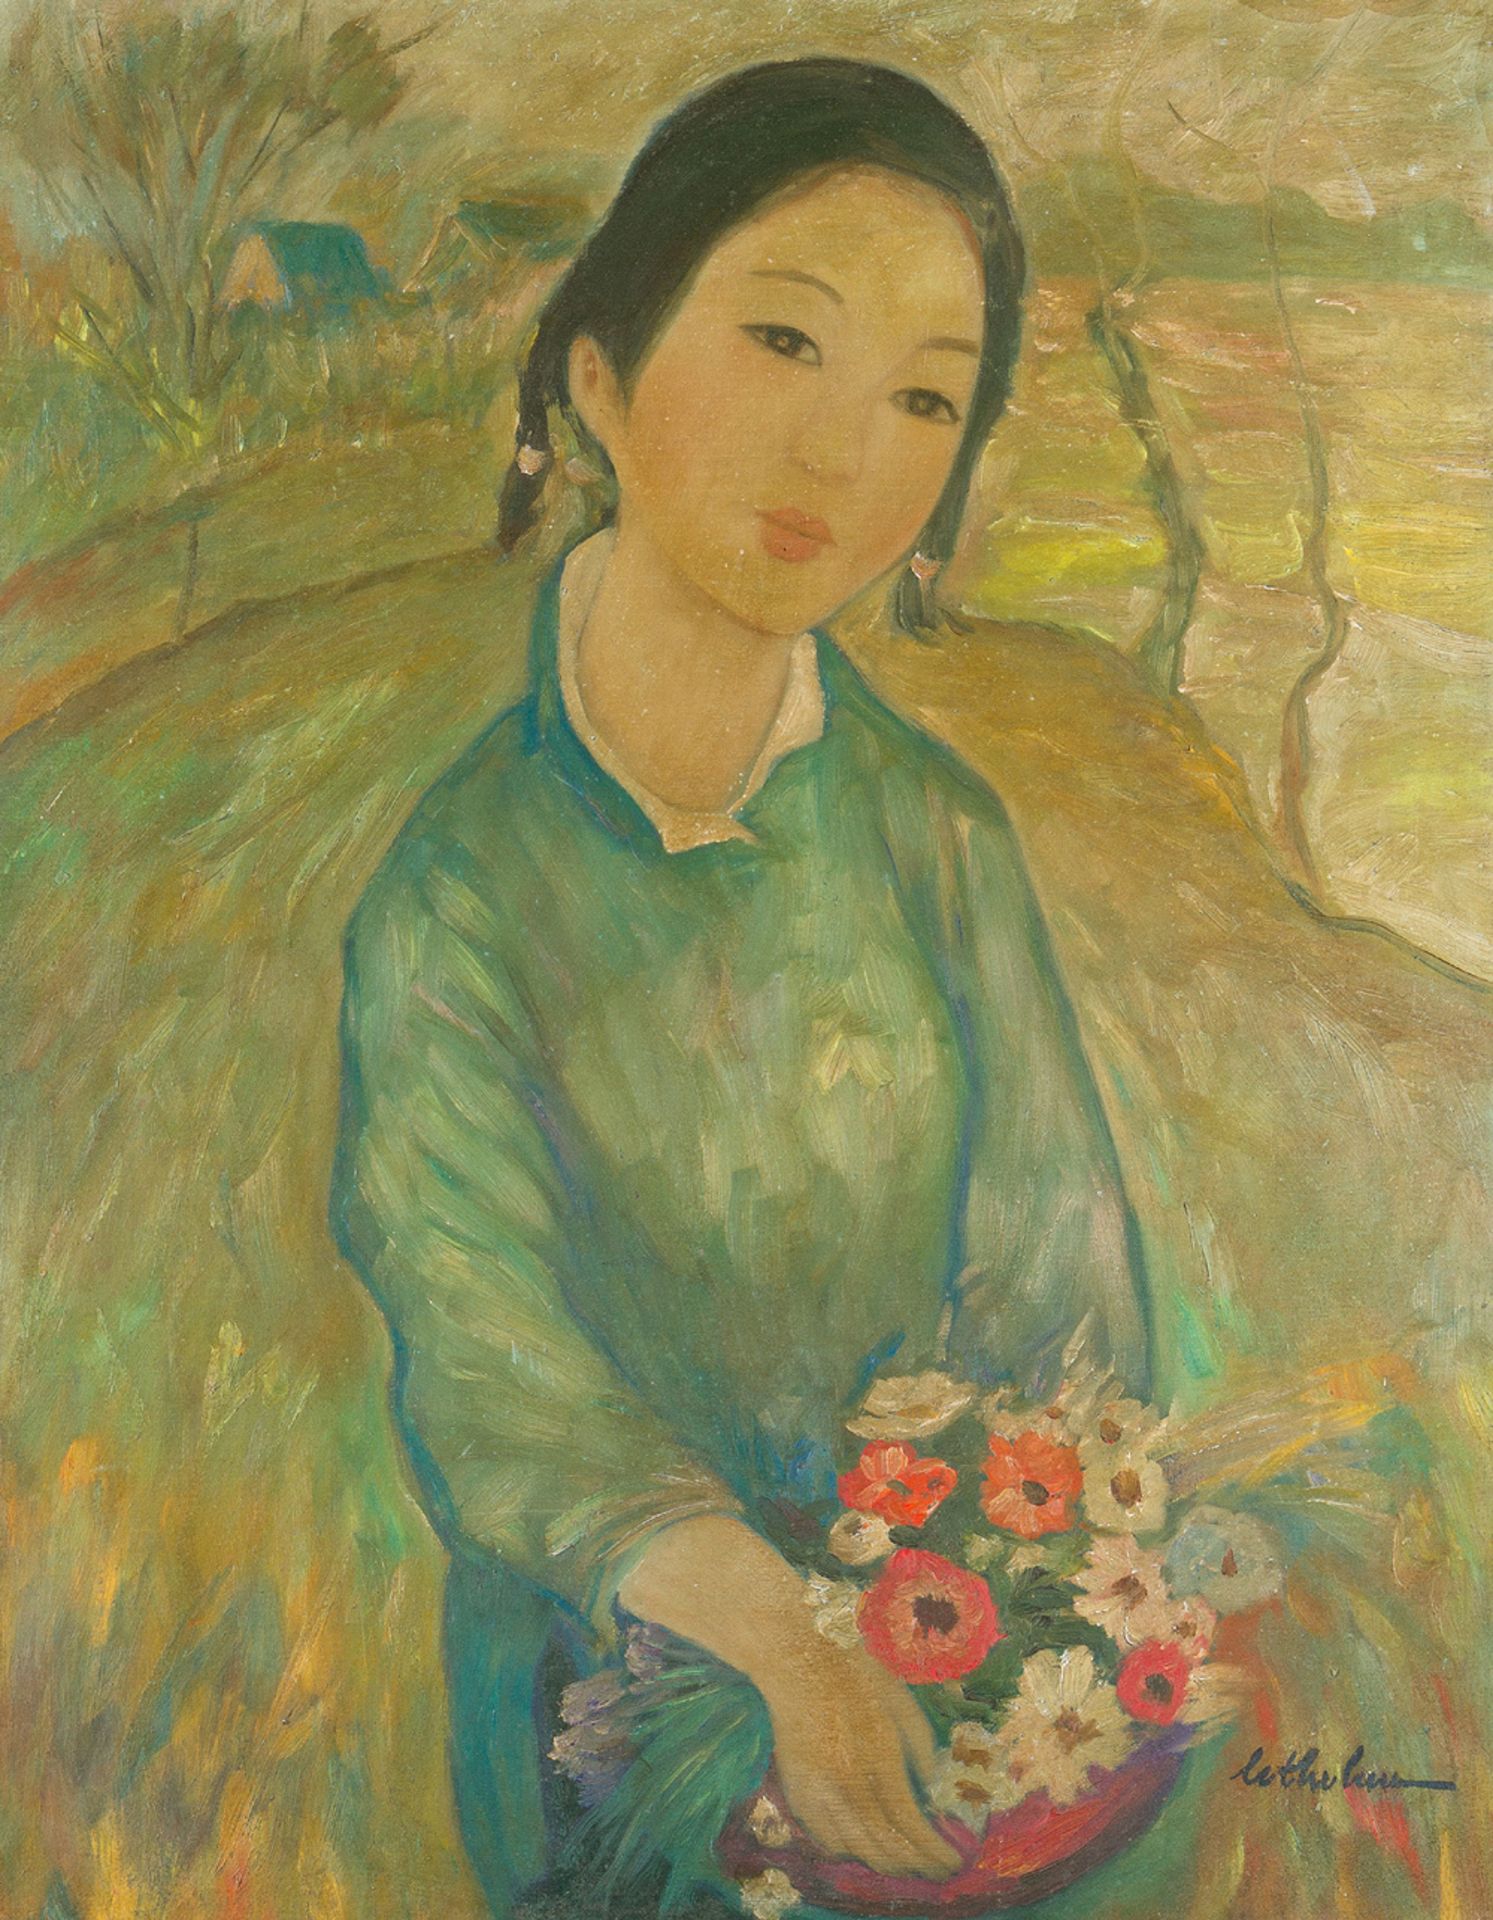 Le Thi Luu (1911-1988)-attributed - Image 2 of 3